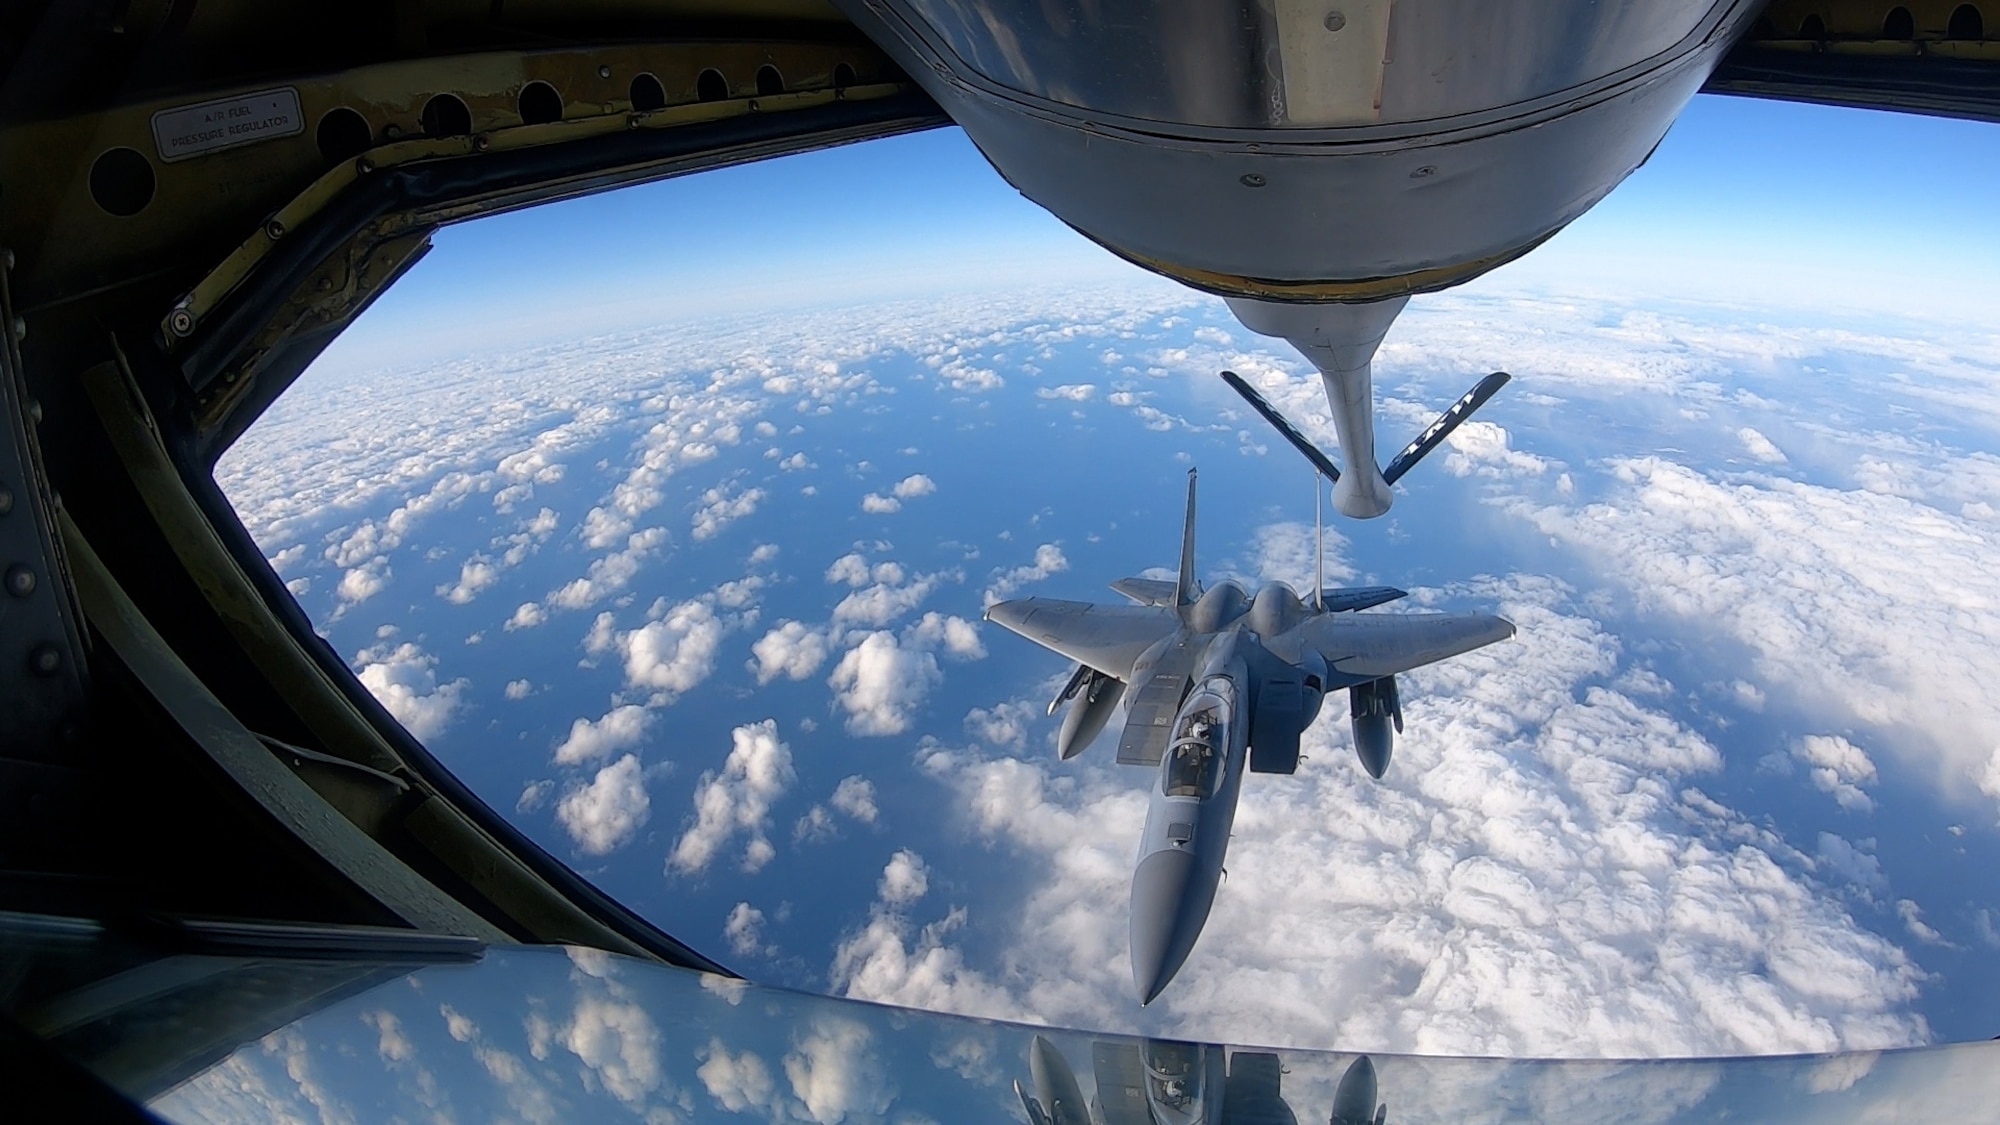 An F-15C Eagle assigned to the 493rd Fighter Squadron departs after aerial refueling during Baltic Trident, March 19, 2021. Baltic Trident was centered on the Agile Combat Employment concept of operations, showcasing the 48th Fighter Wing’s multi-capable Airmen and their ability to effectively carry out the mission away from home station with varying levels of support and a smaller manpower footprint. (U.S. Air Force photo by Airman 1st Class Jessi Monte)